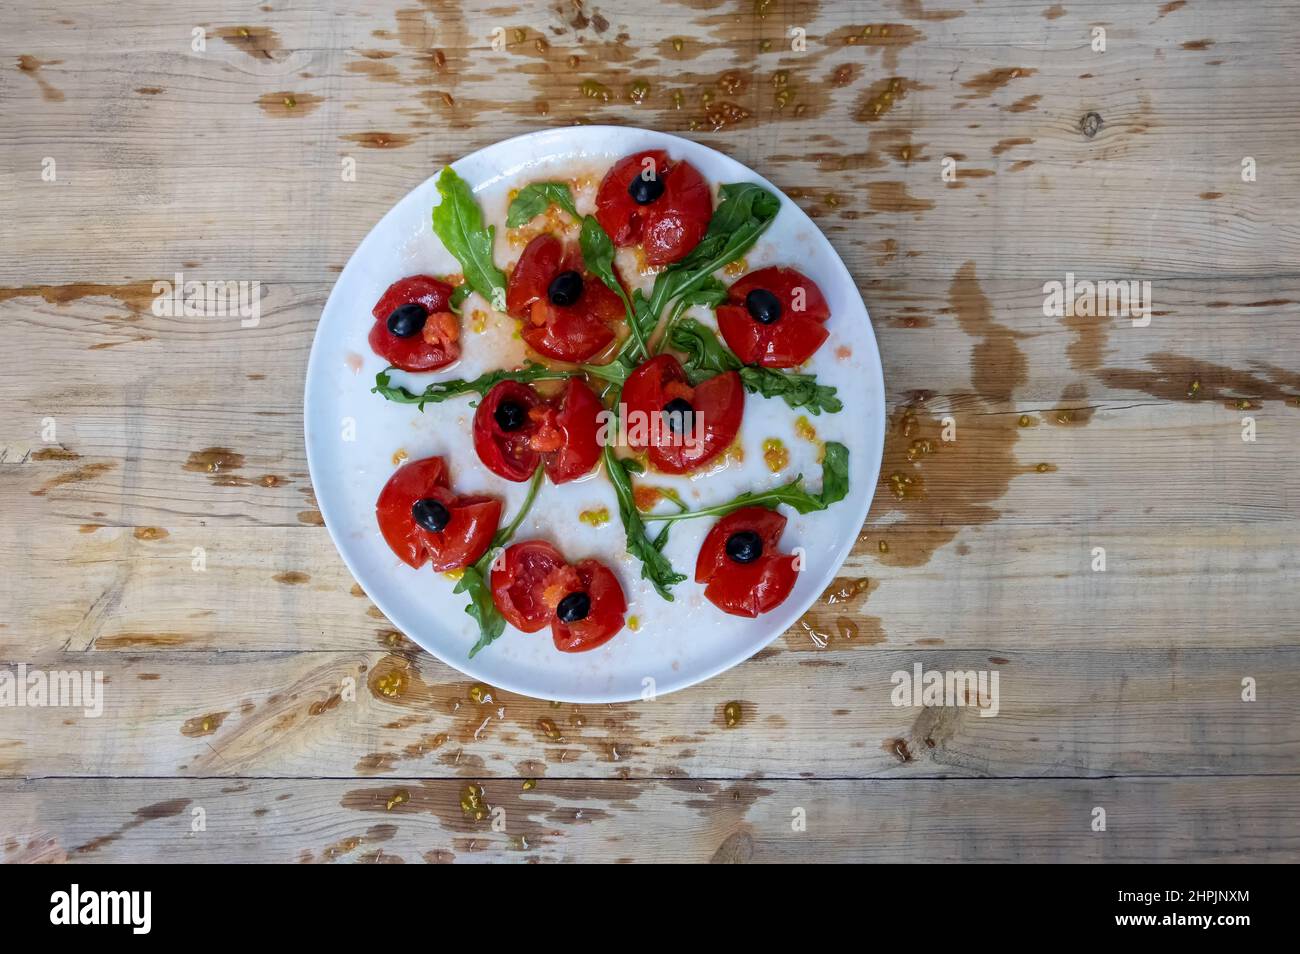 Tomatoes smashed with a fist, decorated with black olives and arugula arranged on a wooden table, the pulp splattered wildly, are supposed to represen Stock Photo